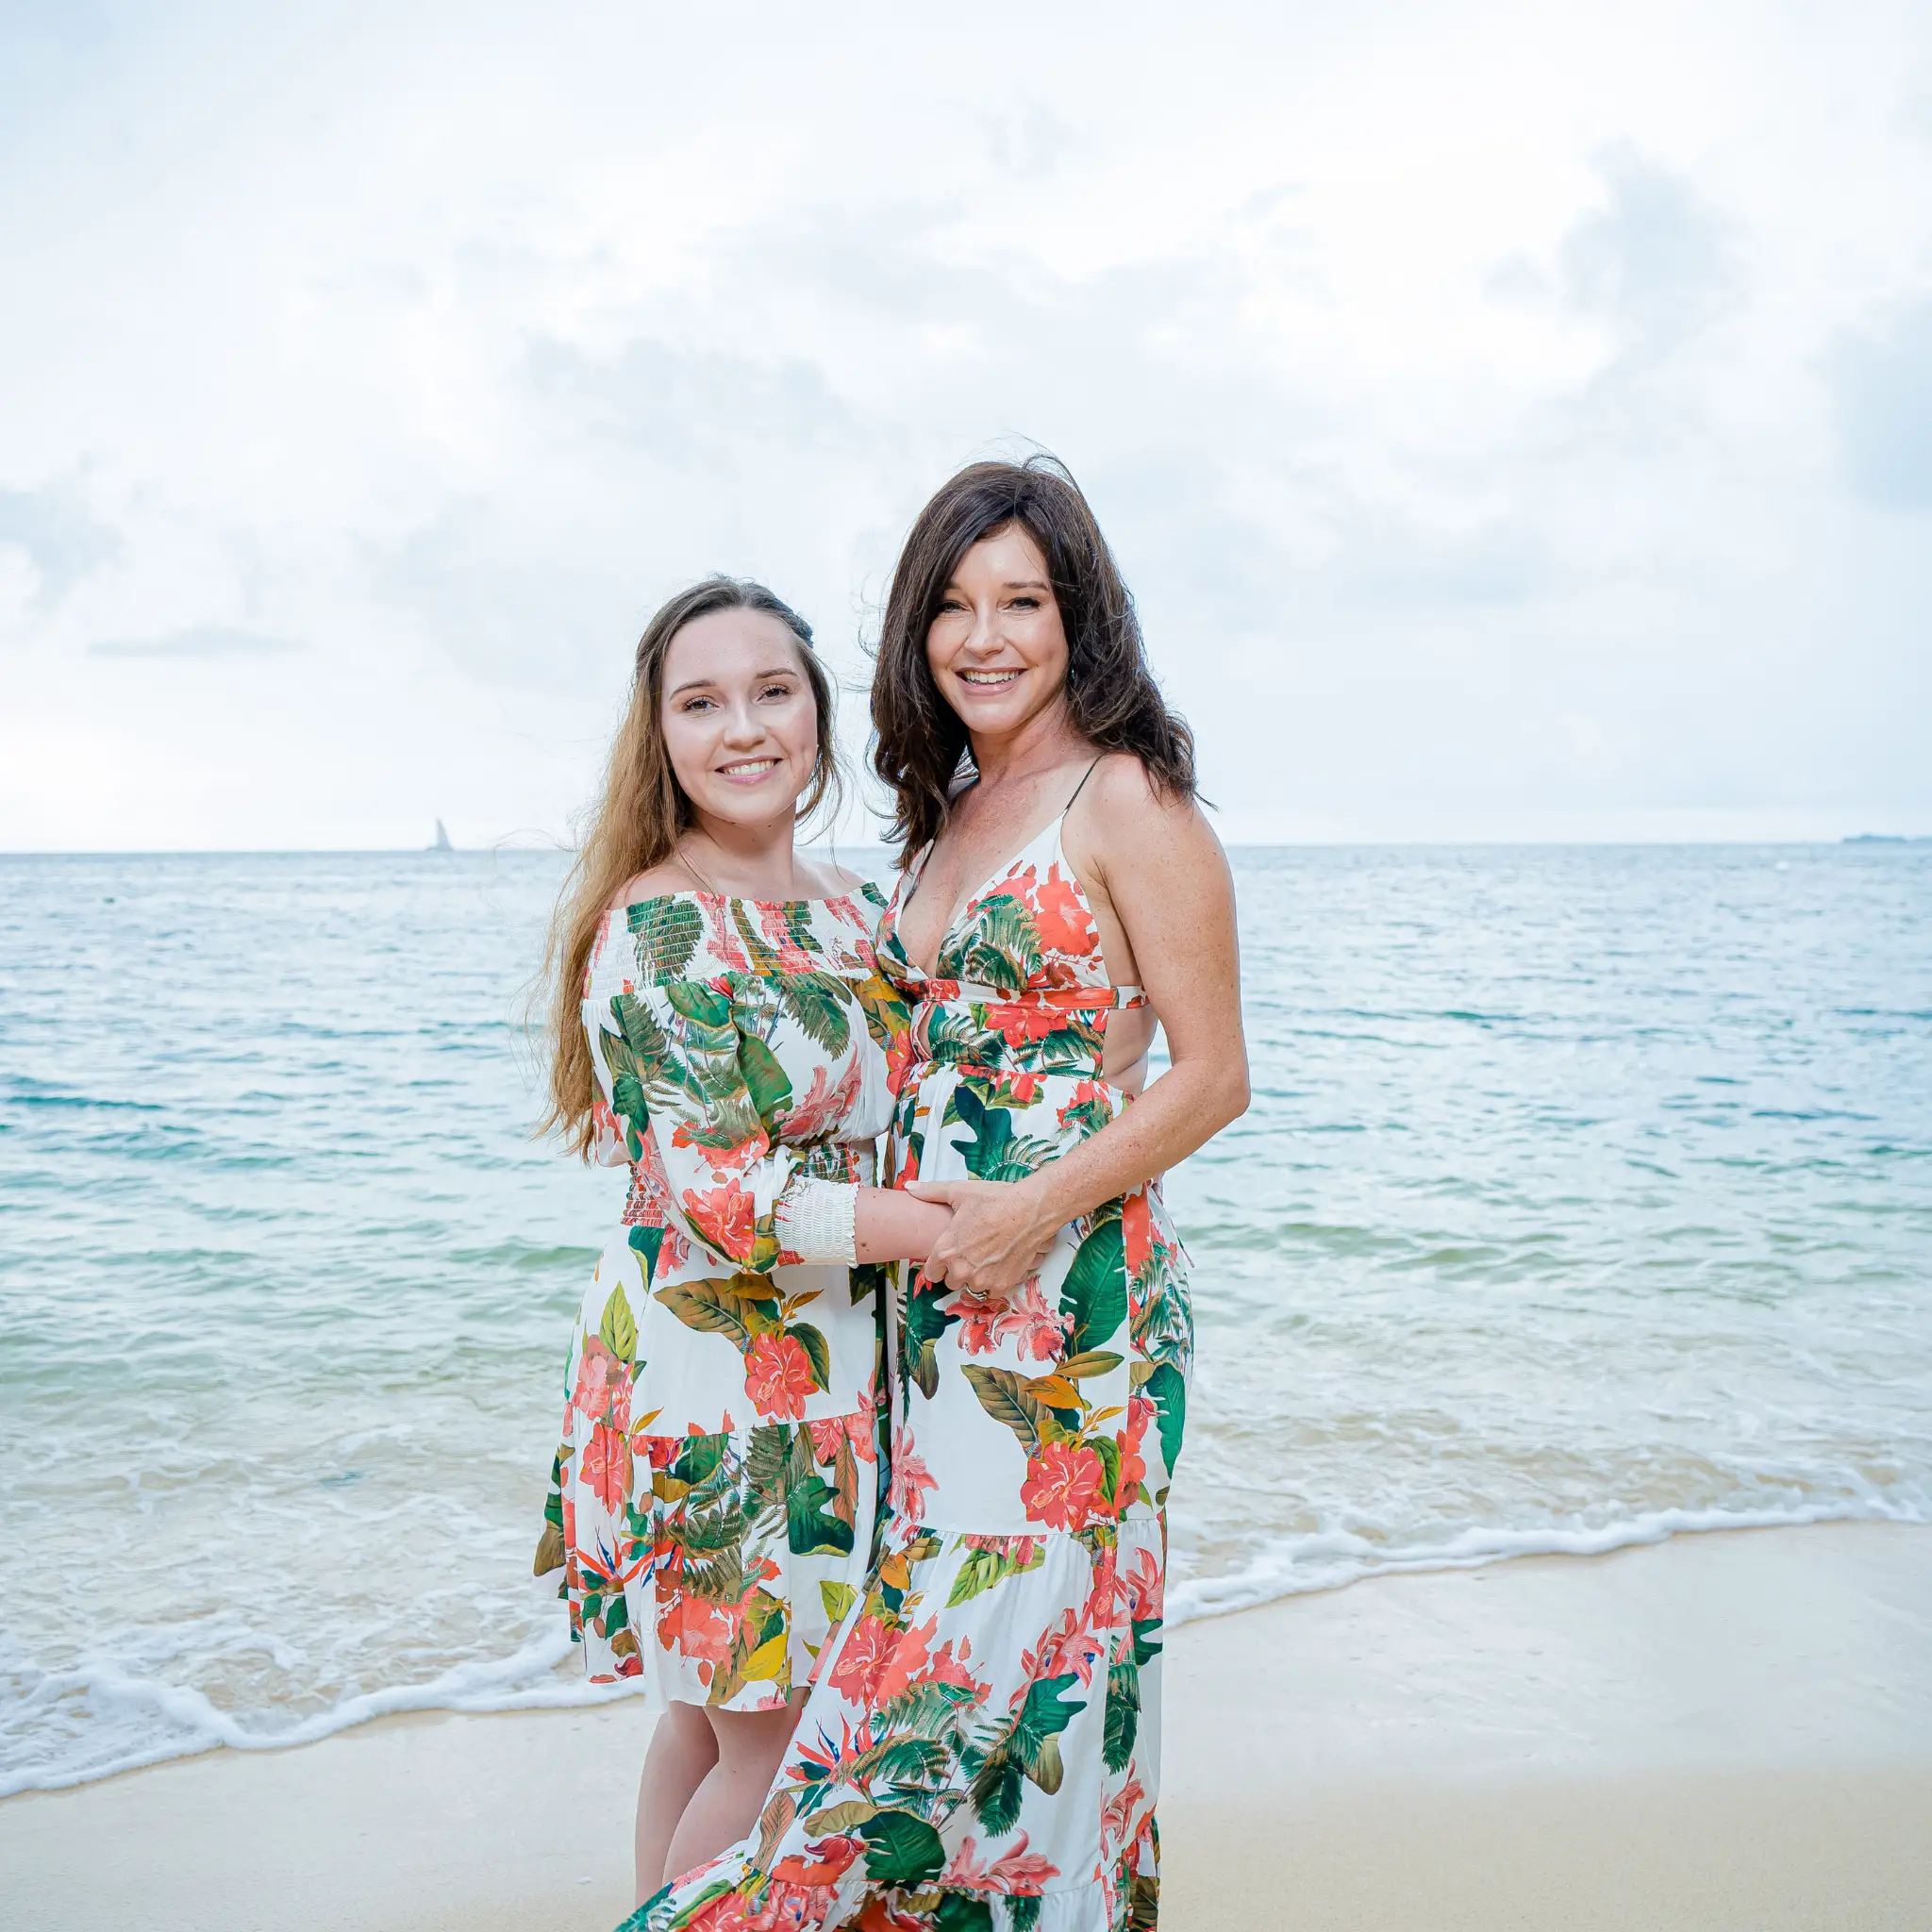 Family photoshoot by Stacey, Localgrapher in Negril